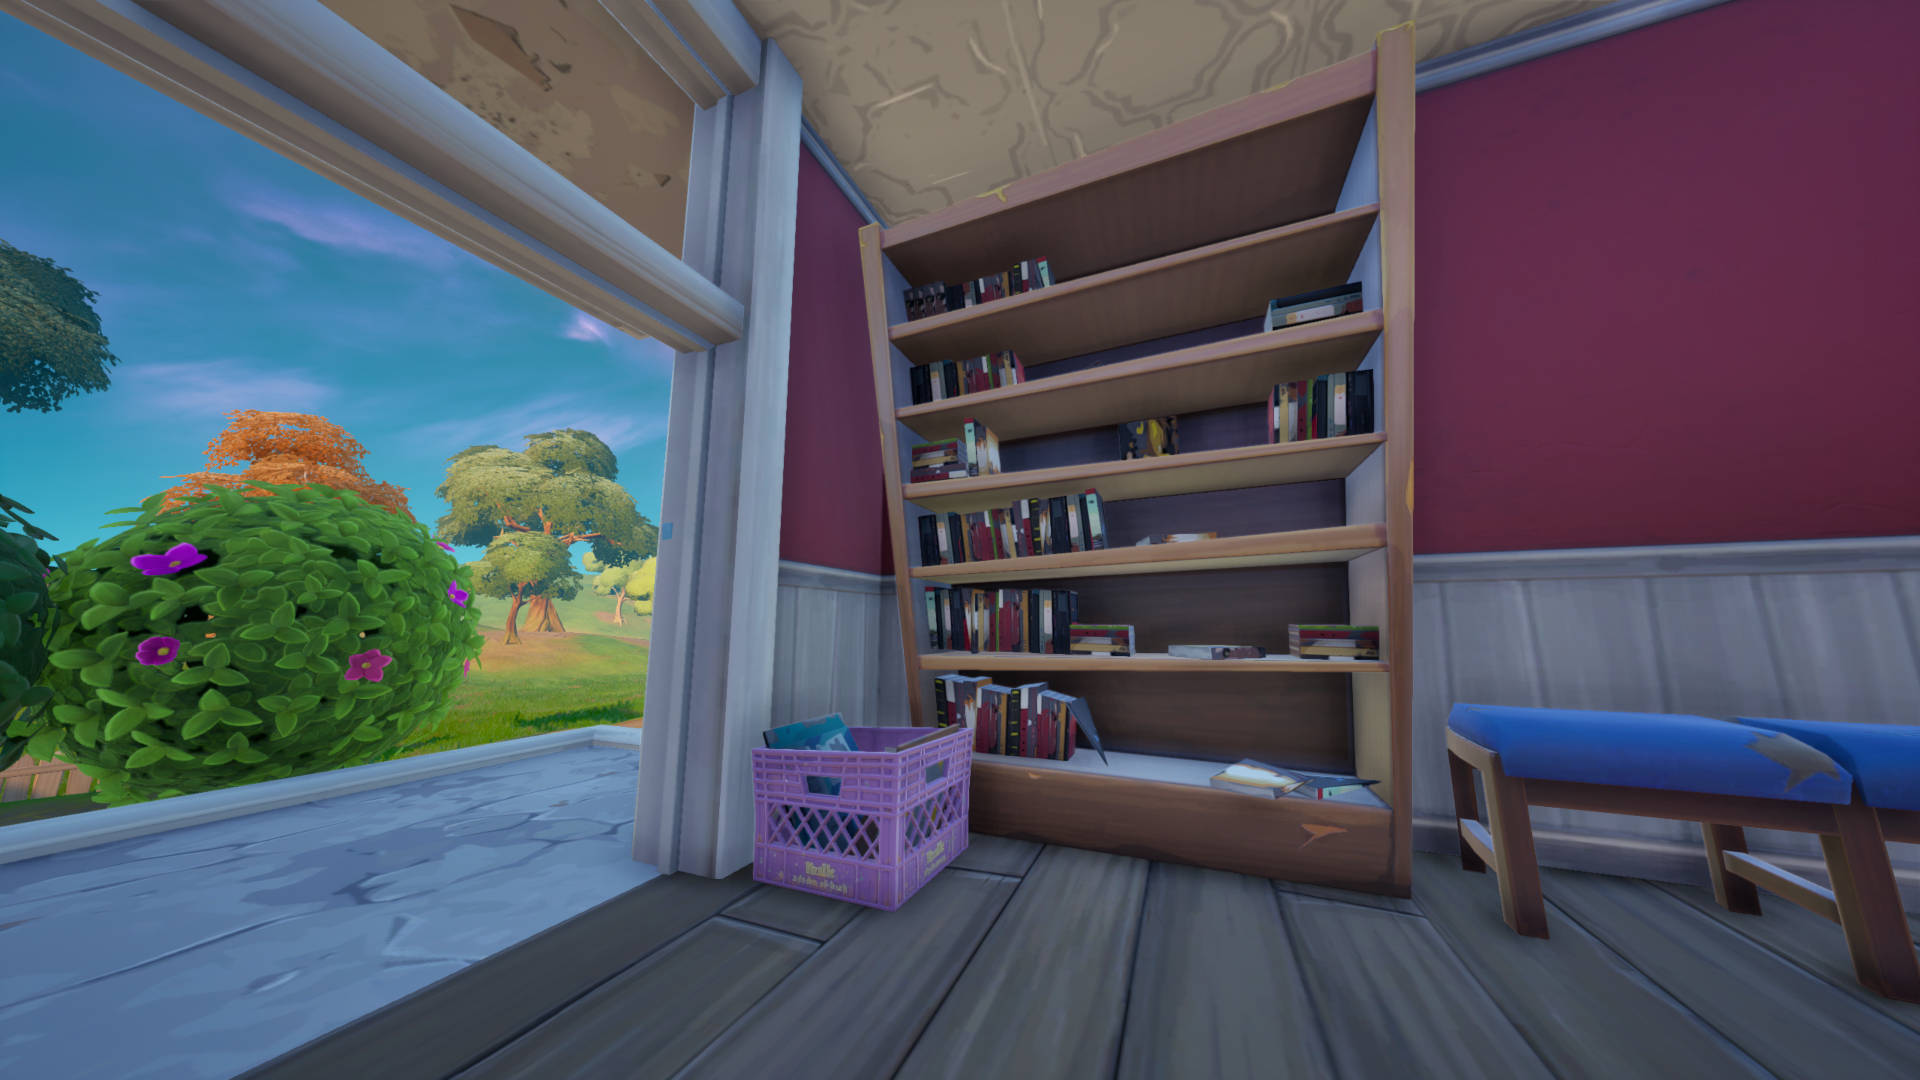 Where to collect records in Fortnite?